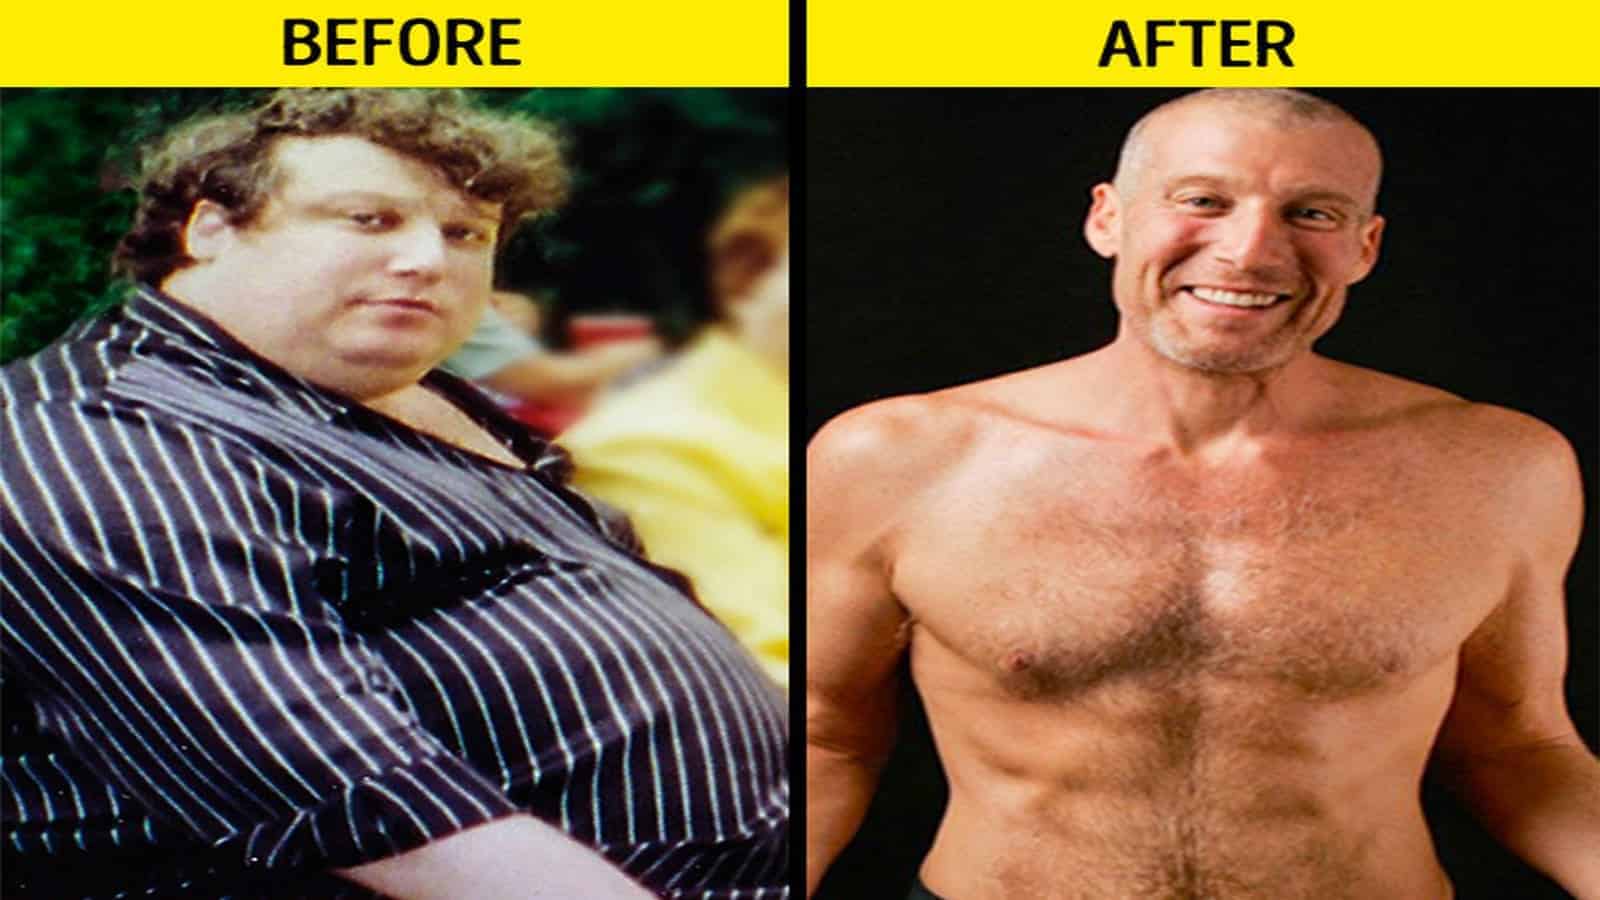 Man Who Lost 220 Pounds Explains 7 Secrets to Lose Weight